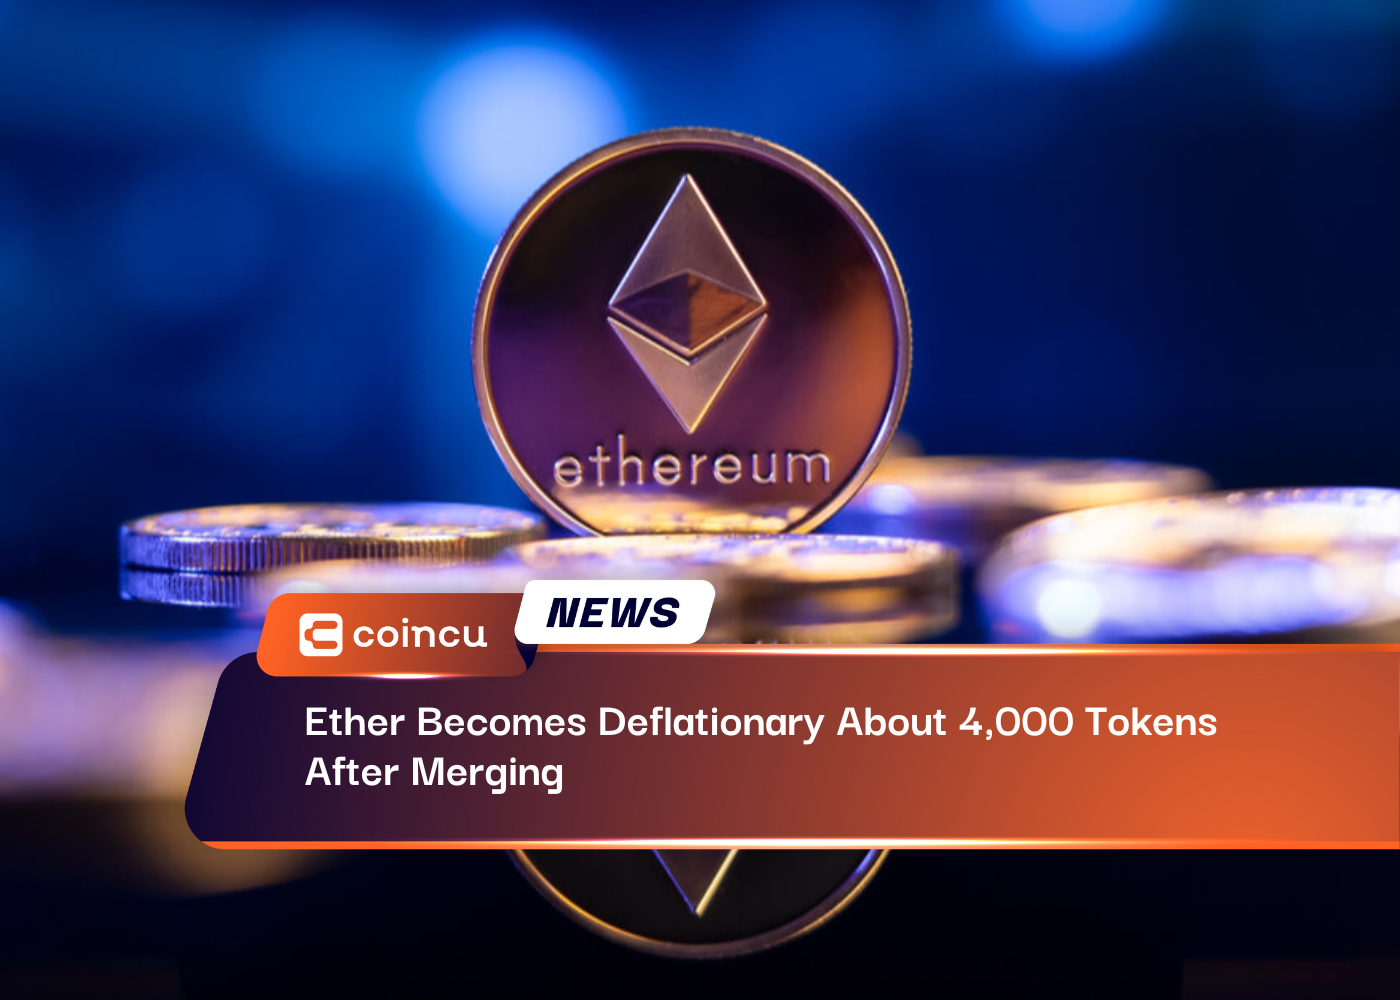 Ether Becomes Deflationary About 4,000 Tokens After Merging